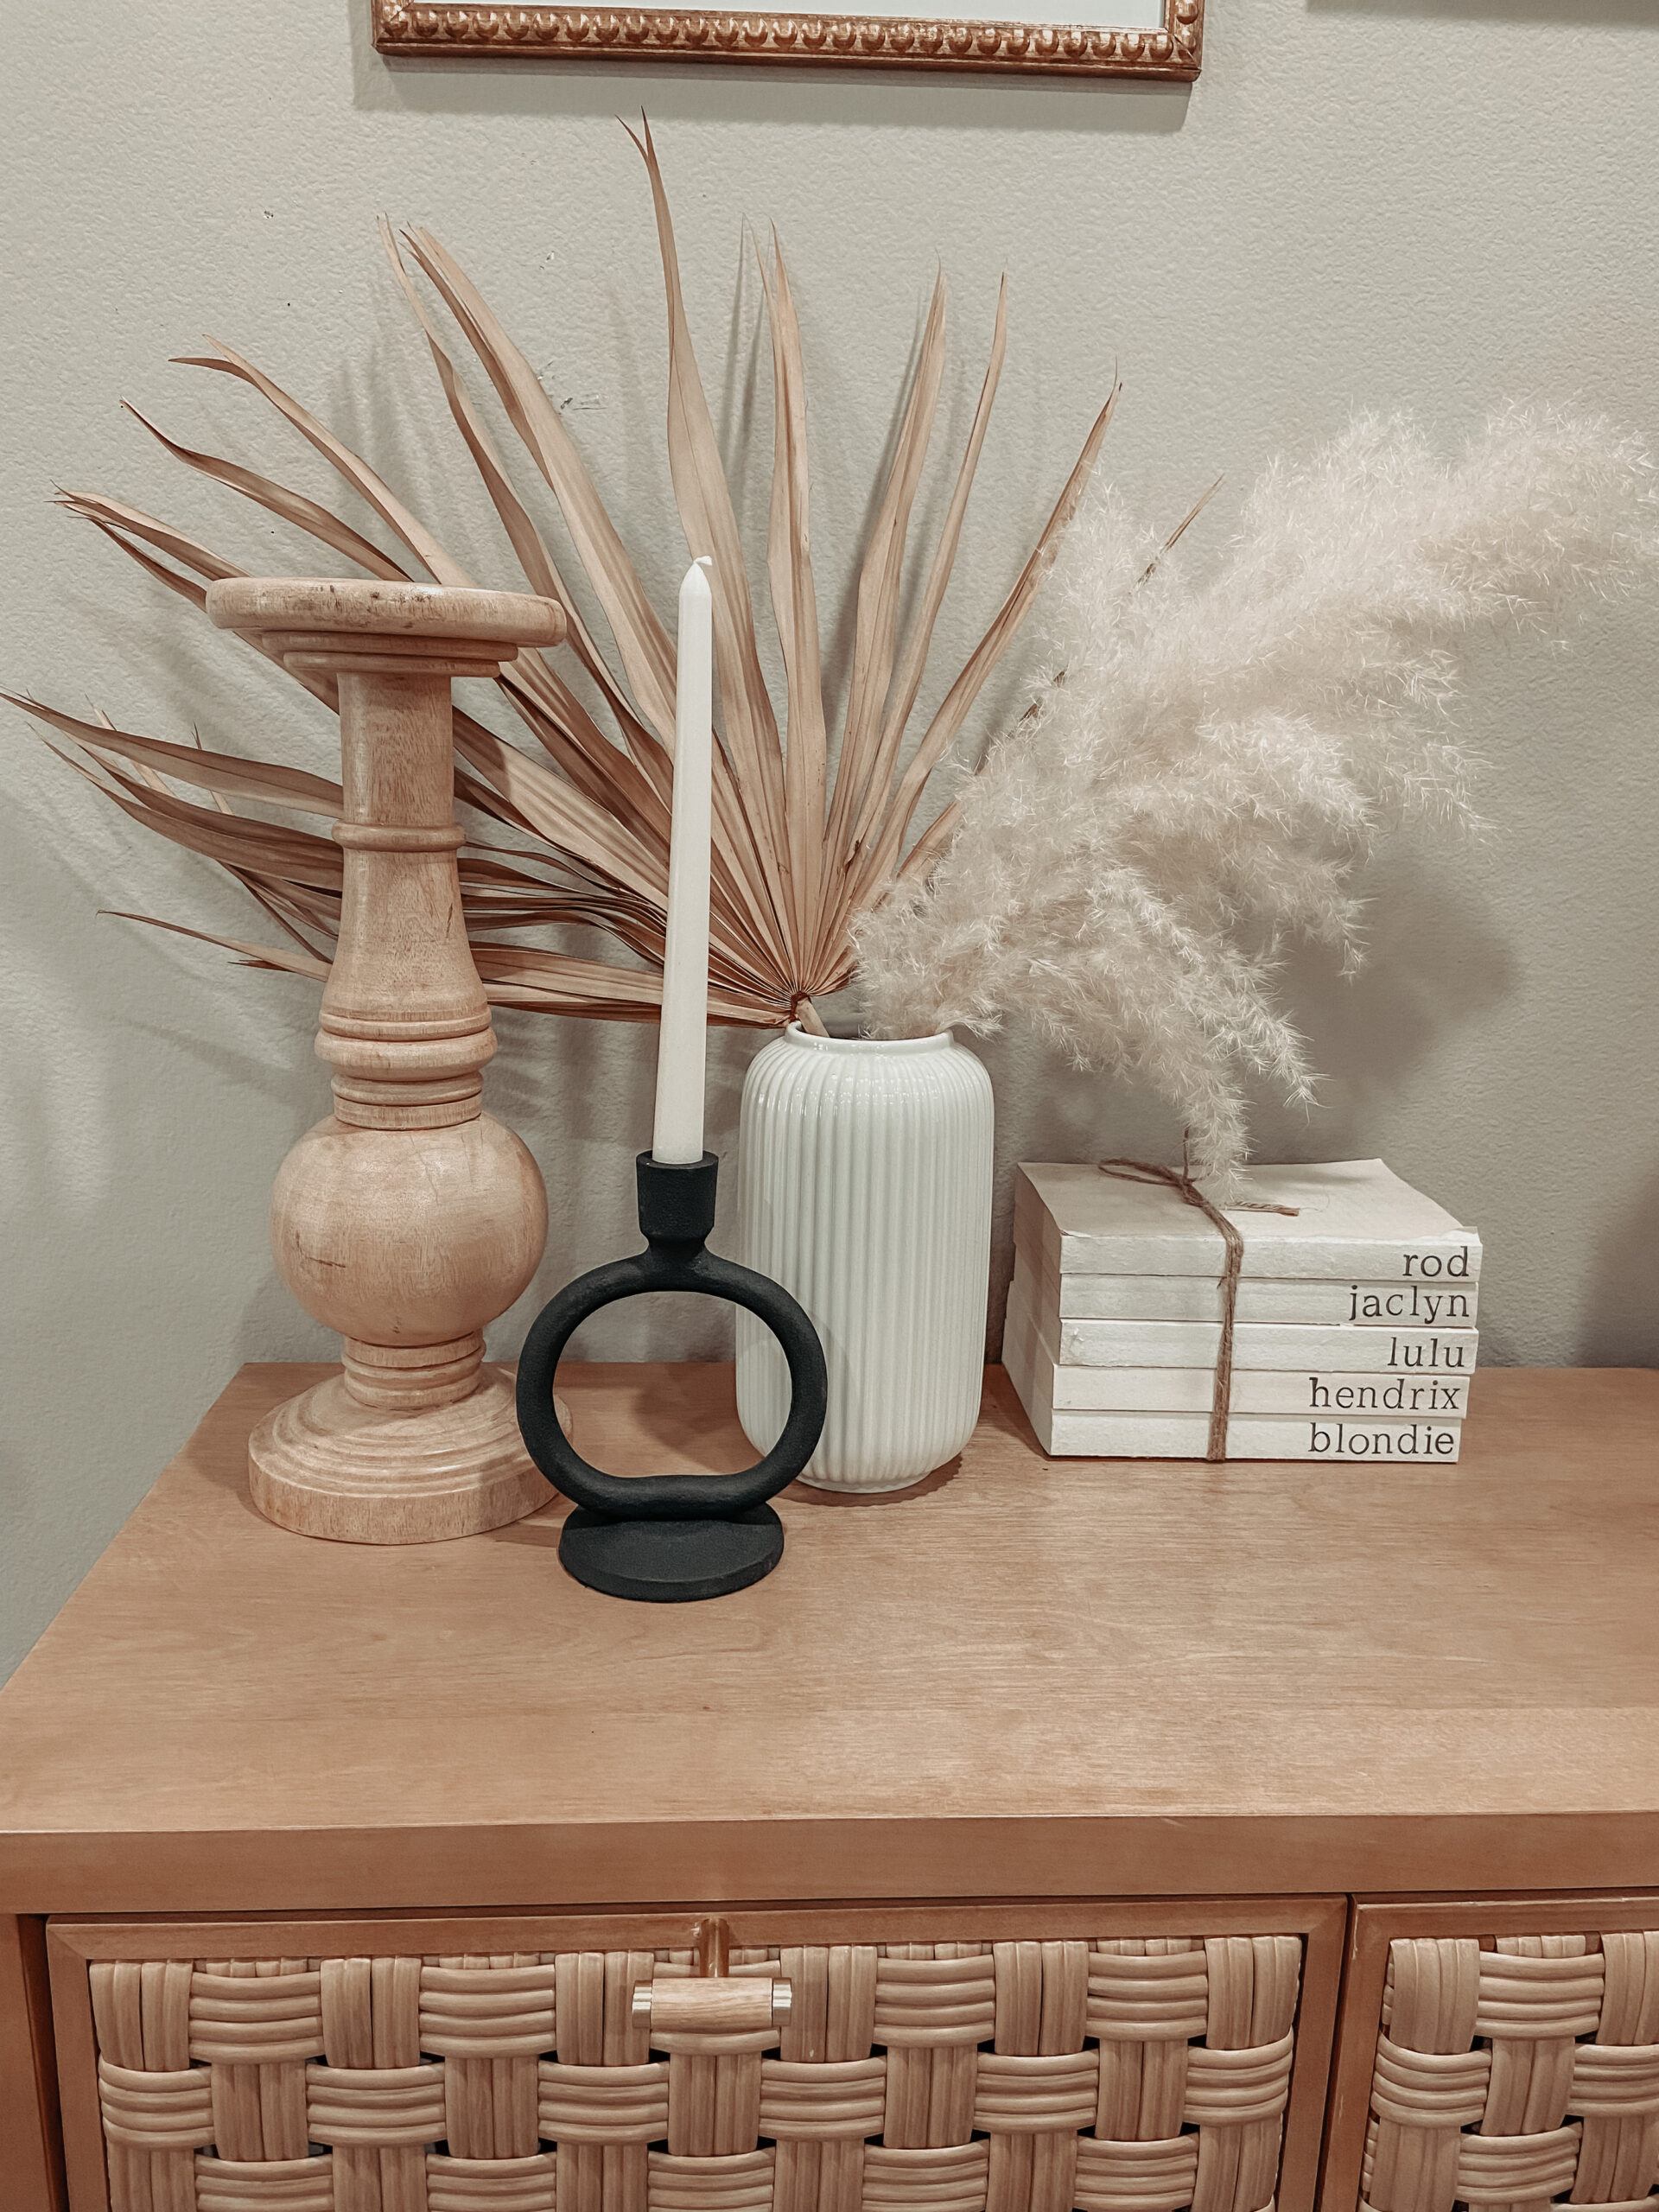 ENTRYWAY REFRESH-Jaclyn De Leon. Giving my entryway a refresh with affordable pieces from Target, Home Goods, Amazon, and H+M. Console table is from the Studio Mcgee line at Target